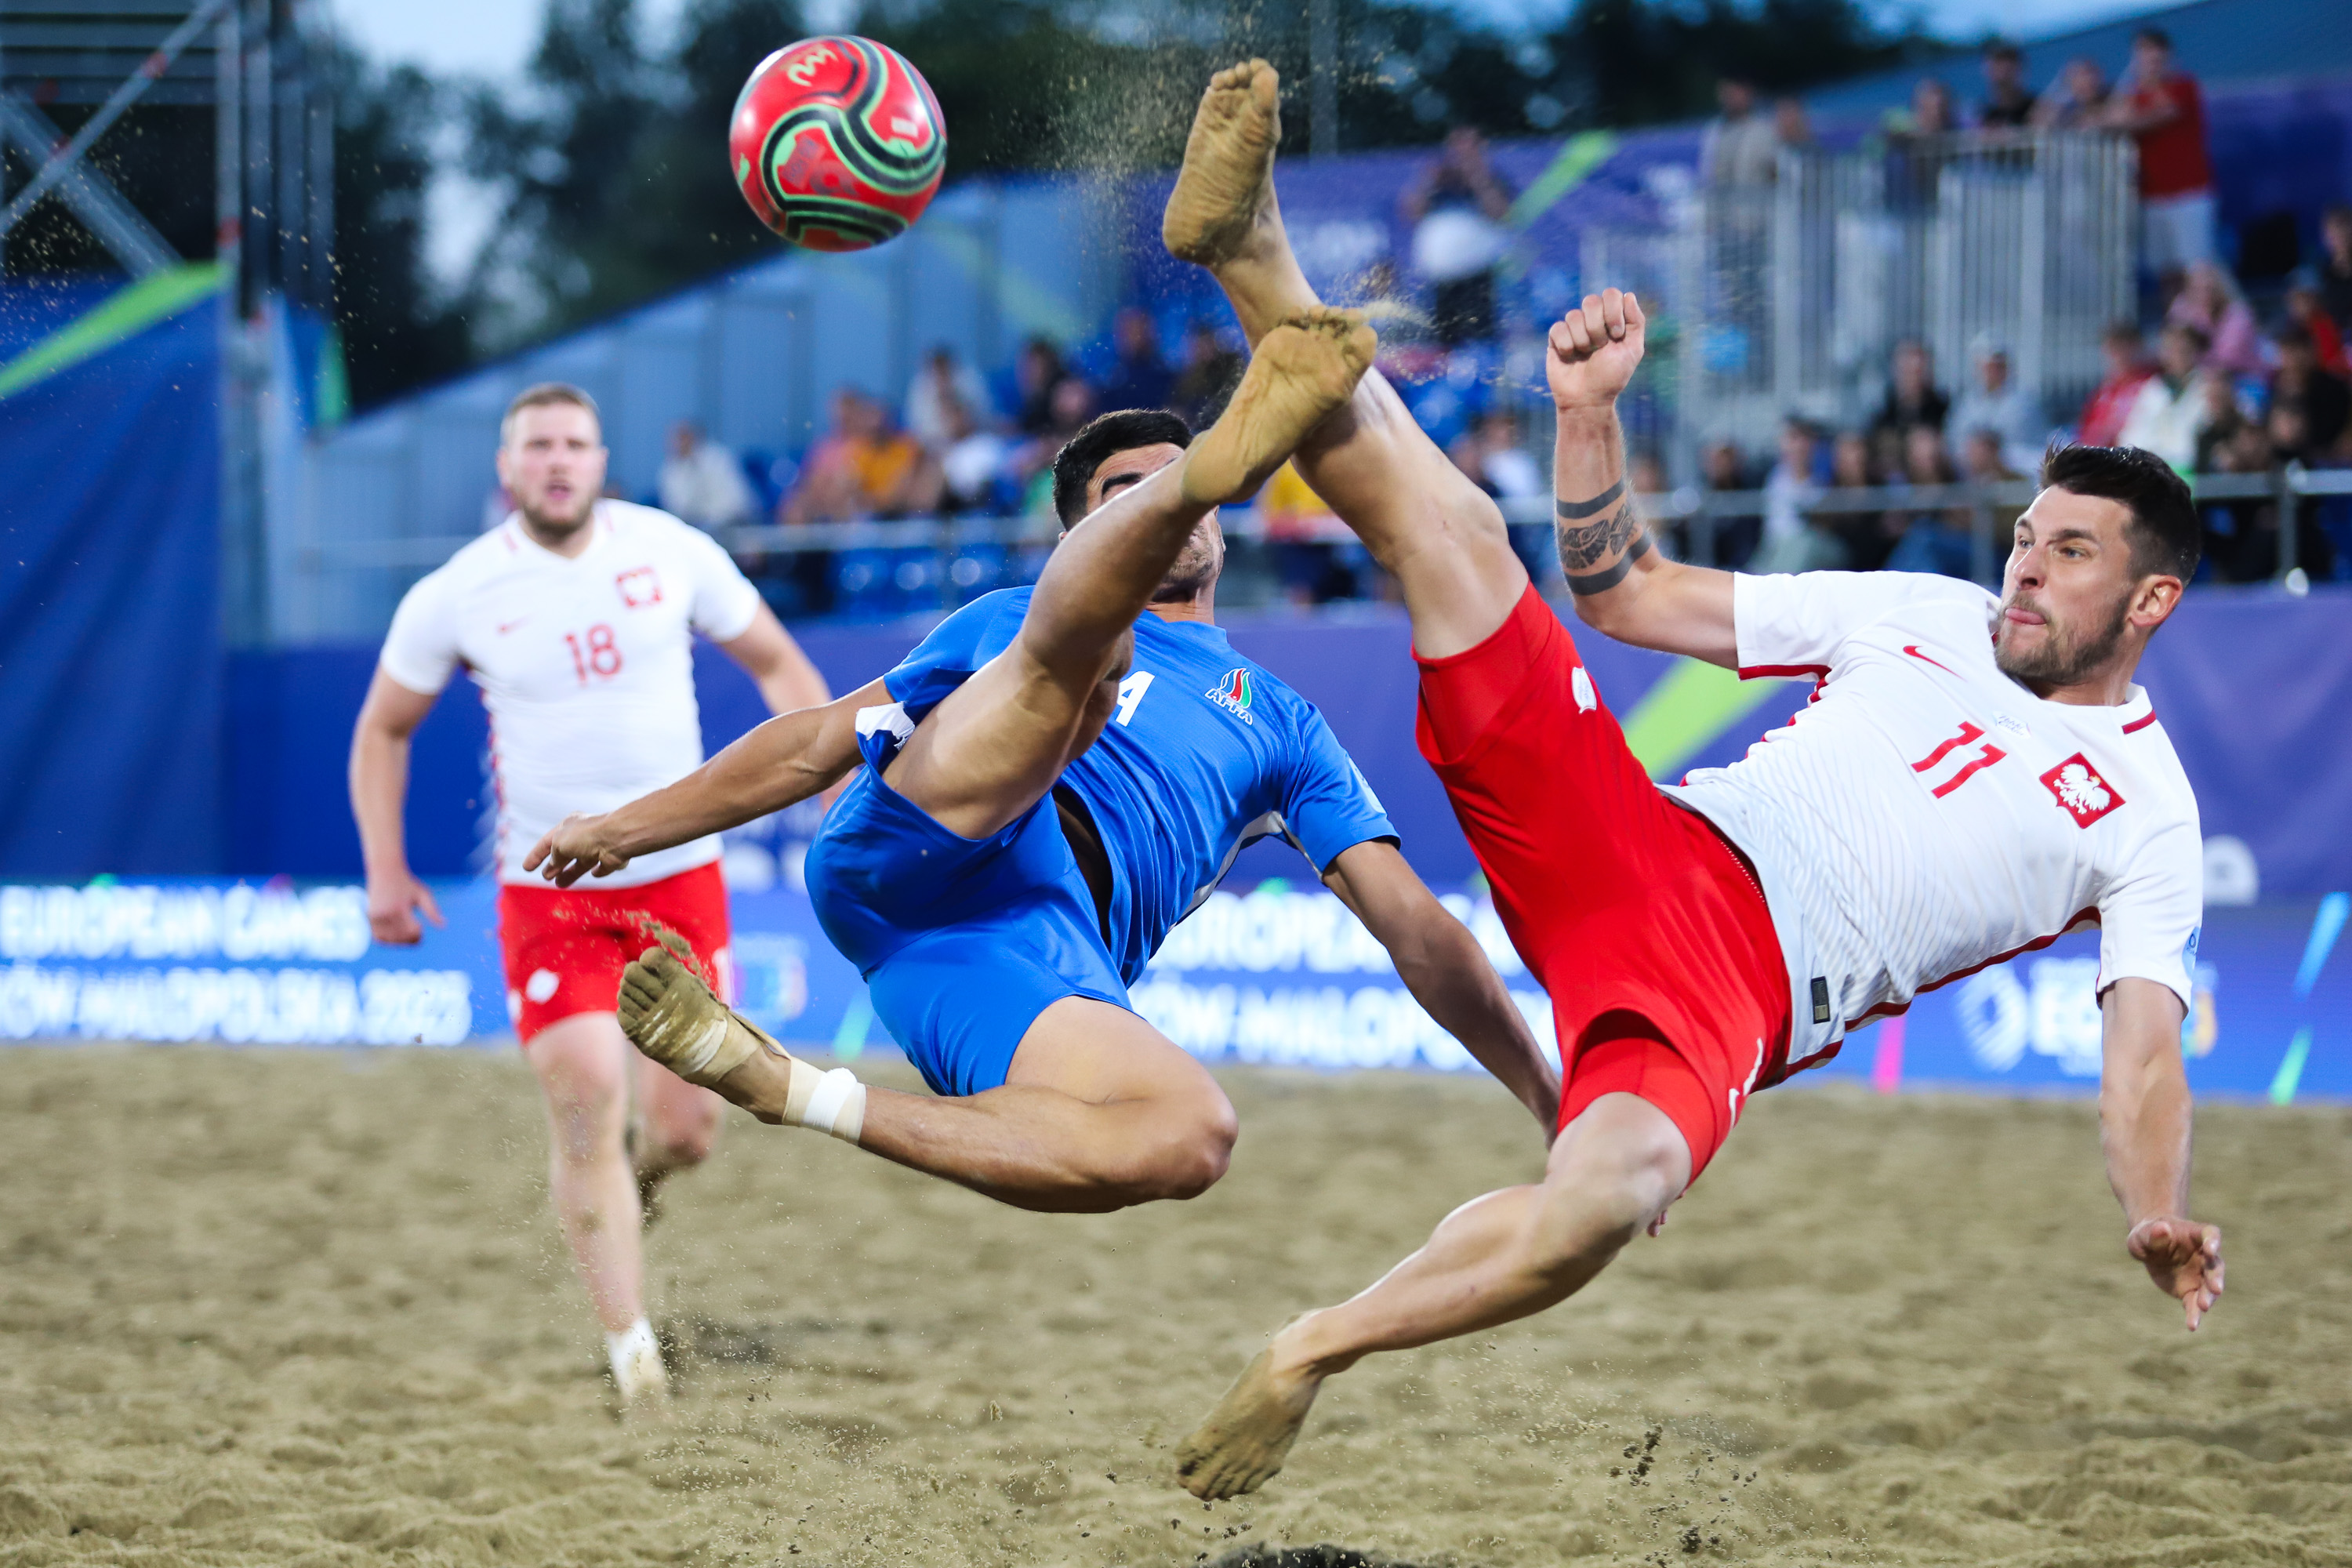 Goals galore on the opening day of the beach soccer tournament